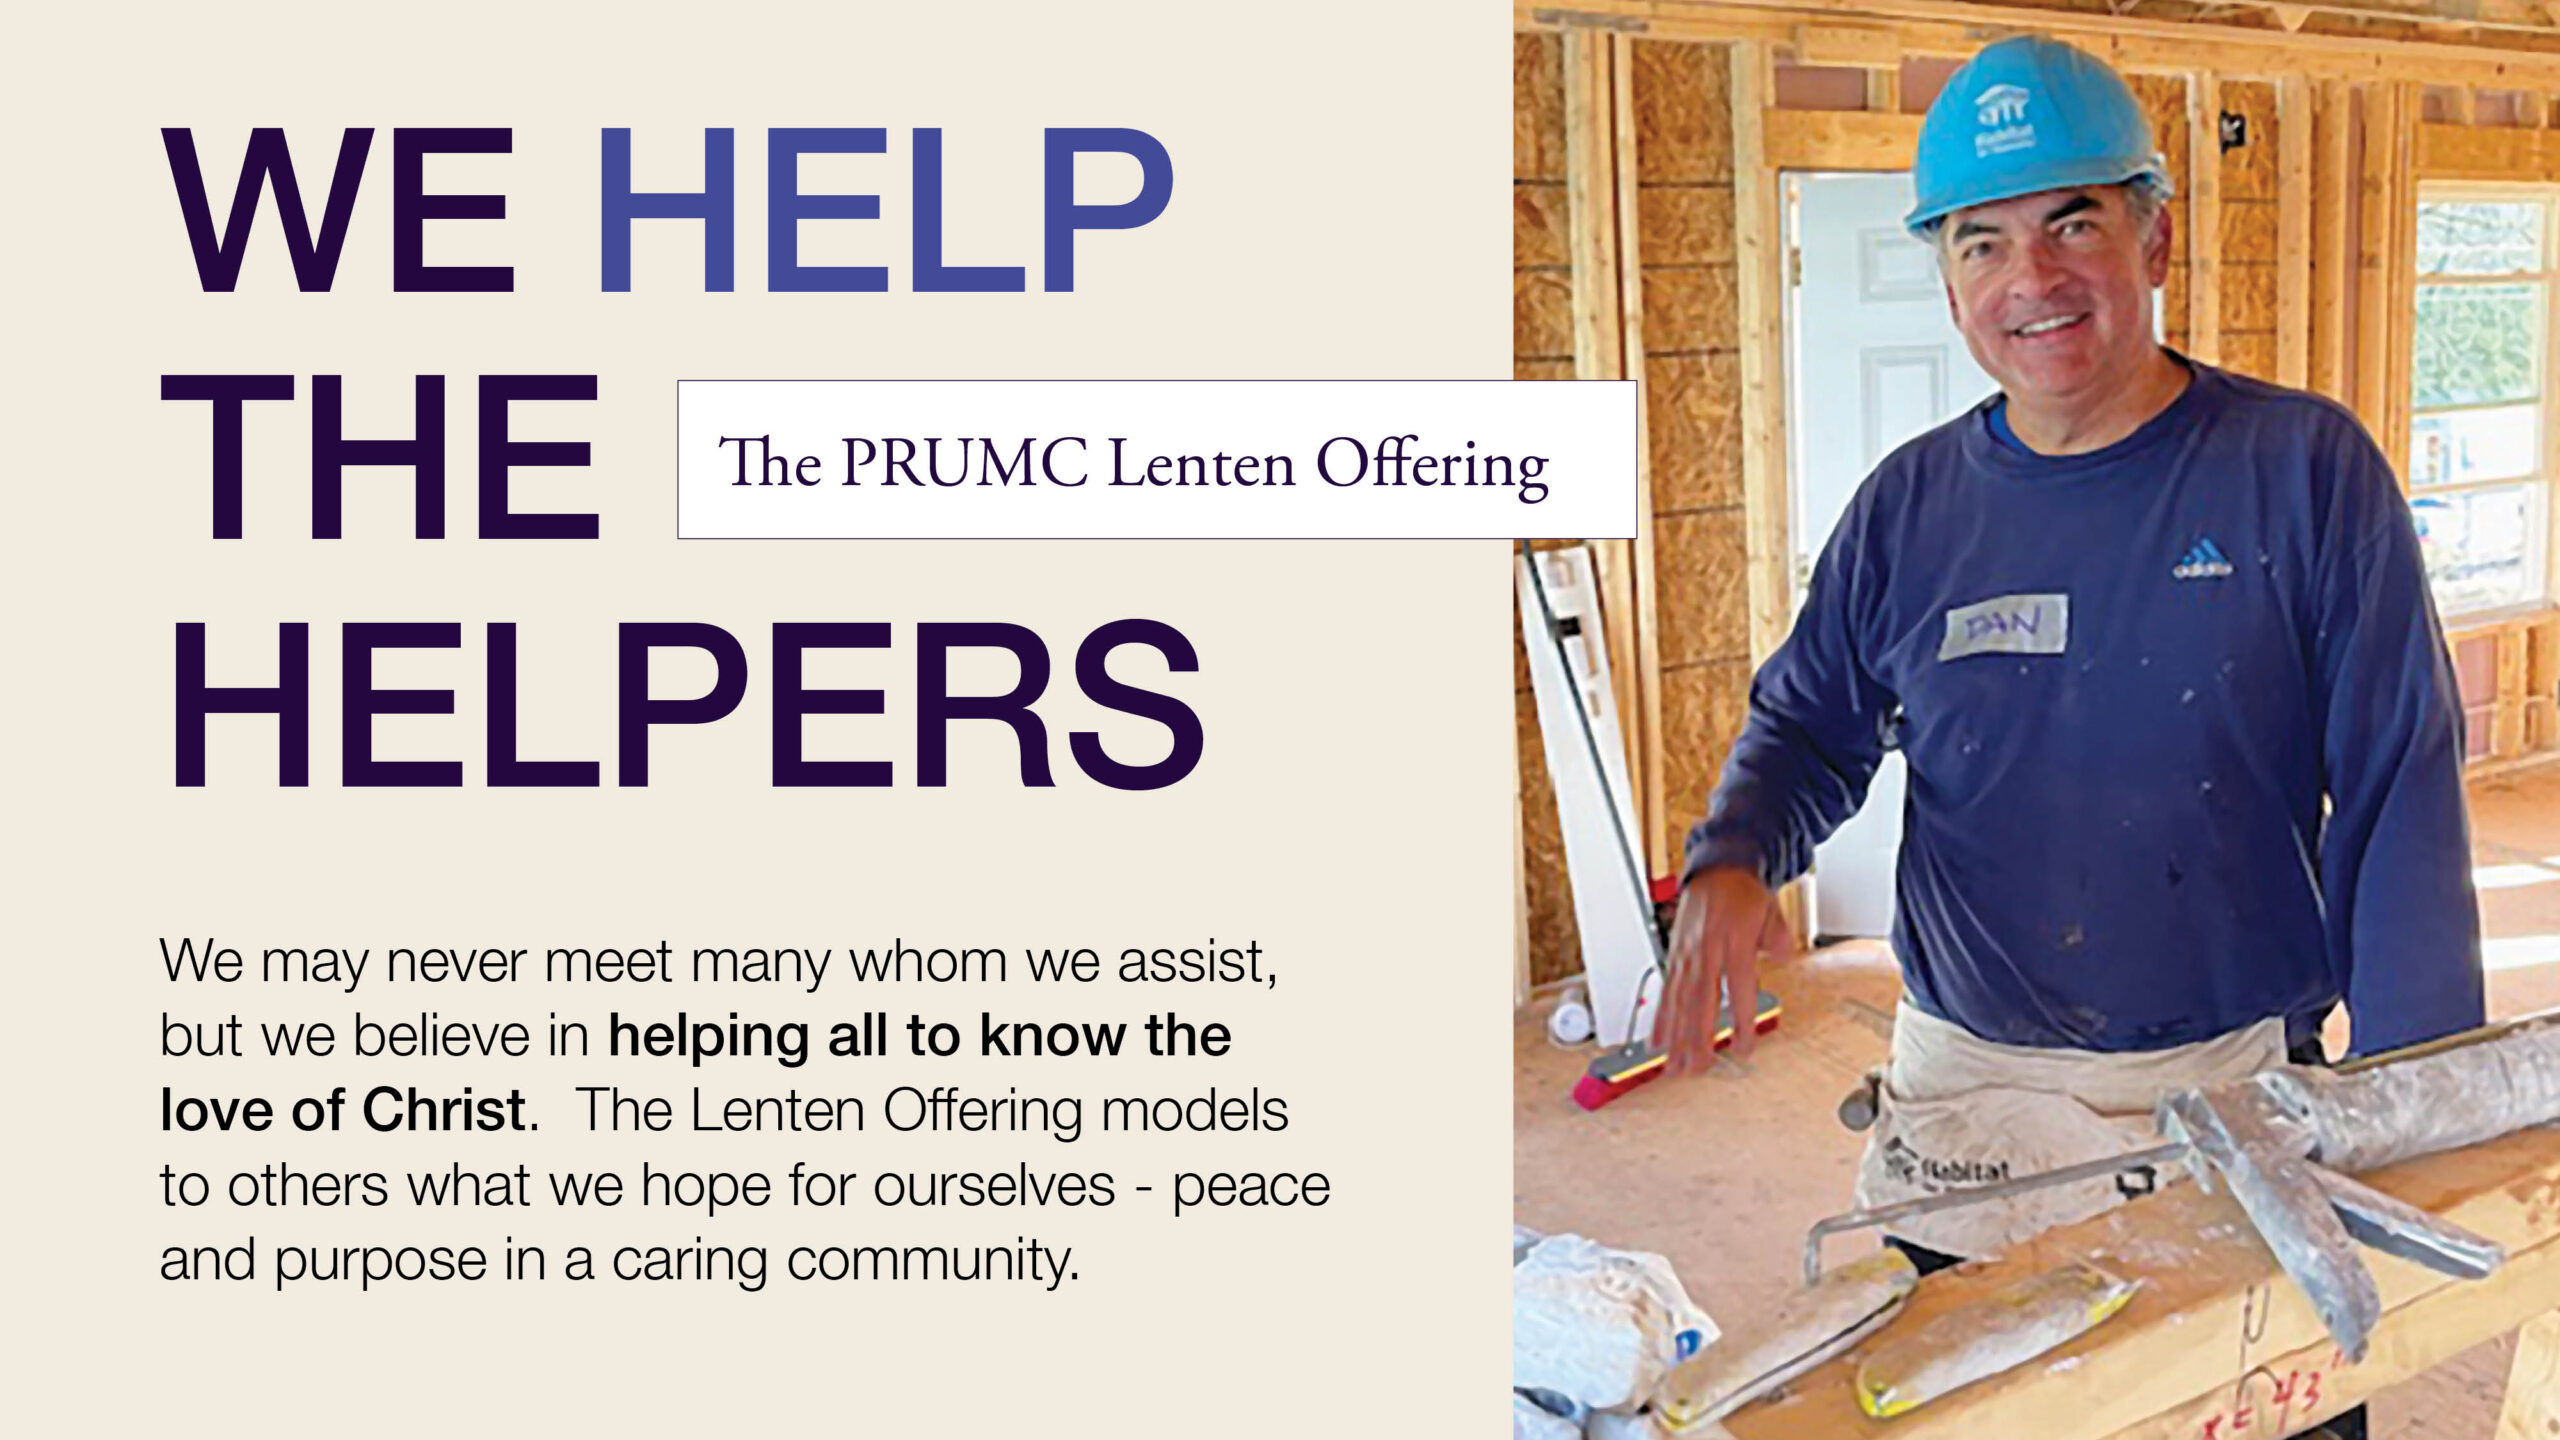 The PRUMC Lenten Offering: We Help the Helpers. Donate to support our local outreach partners in Atlanta.